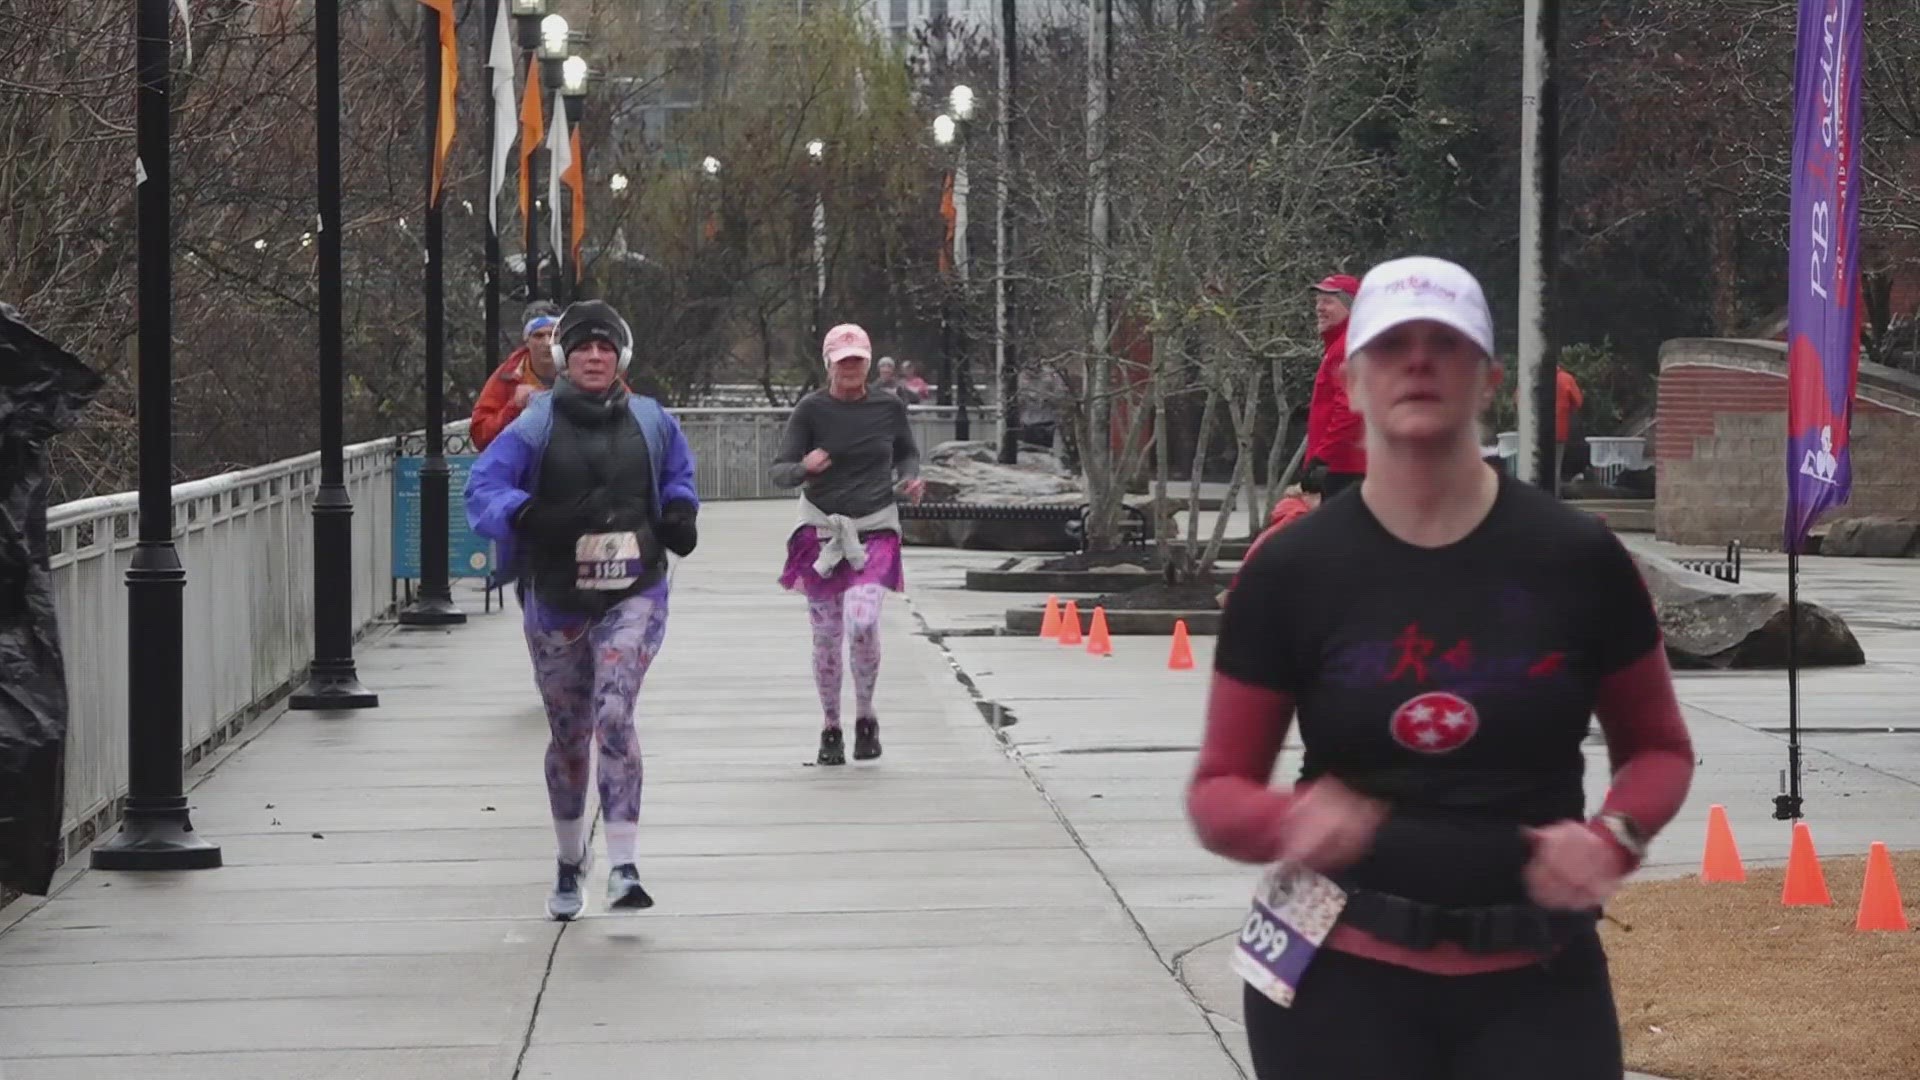 The marathon was meant to raise awareness of the Julia Barbara Foundation, a nonprofit that works to find a cure for DIPG.